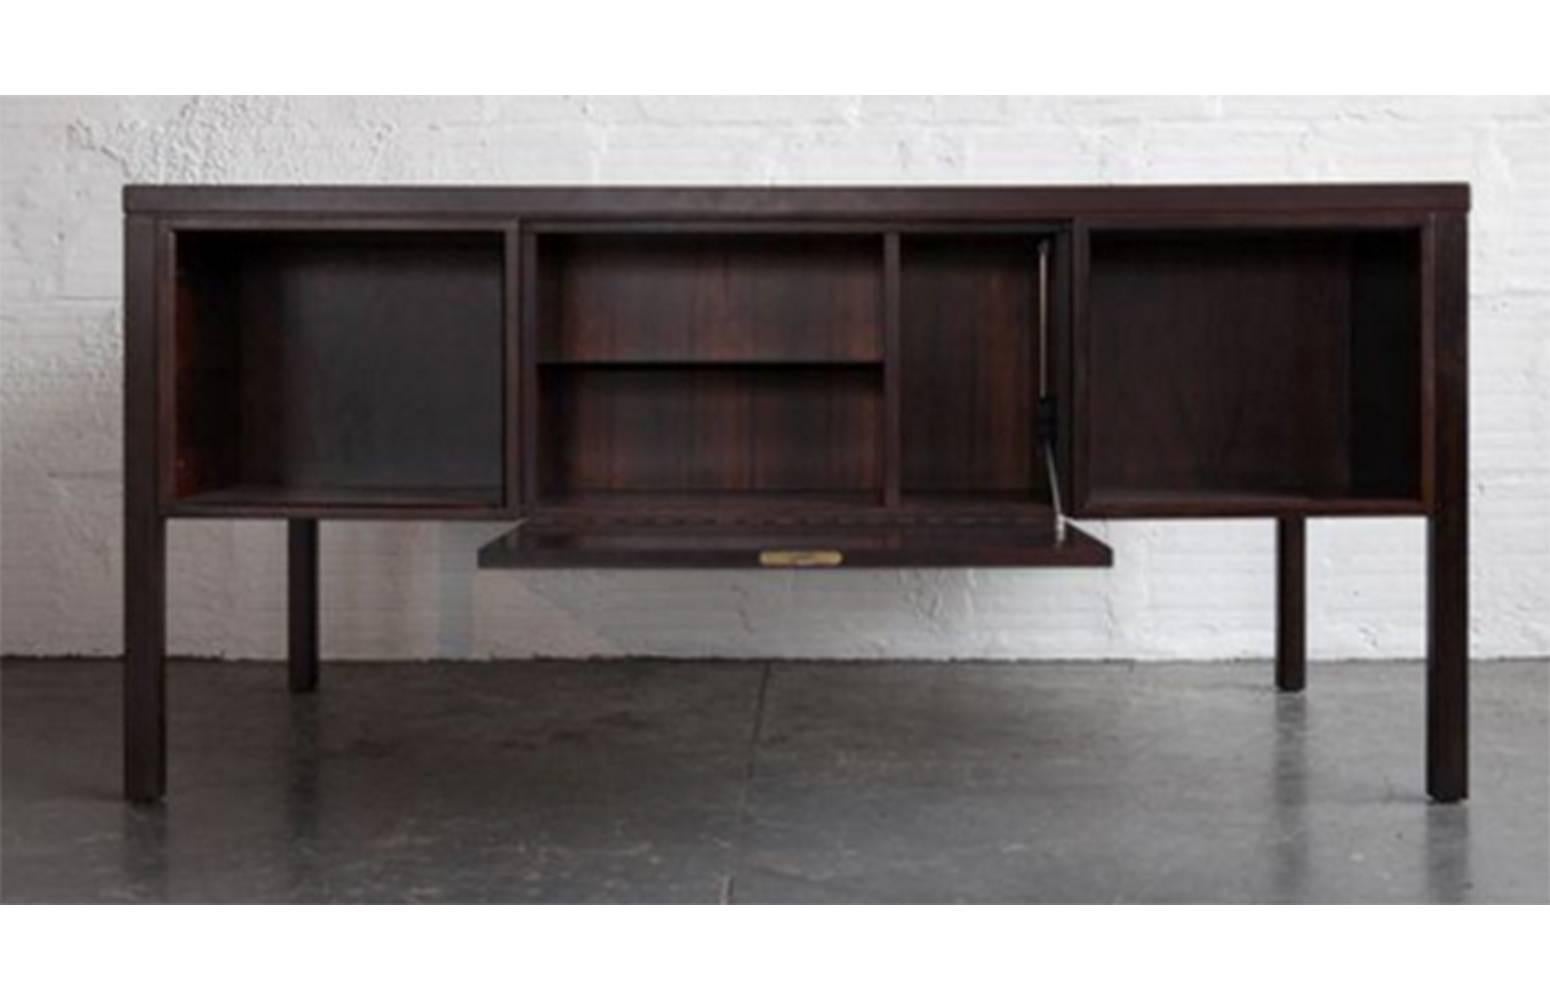 Danish Modern rosewood desk by Gunni Omann. Three drawers on left side, one-drawer for files on the right side, all lockable with included key.
Drop down locking cabinet in front to store anything privately.

This Mid-Century piece has been